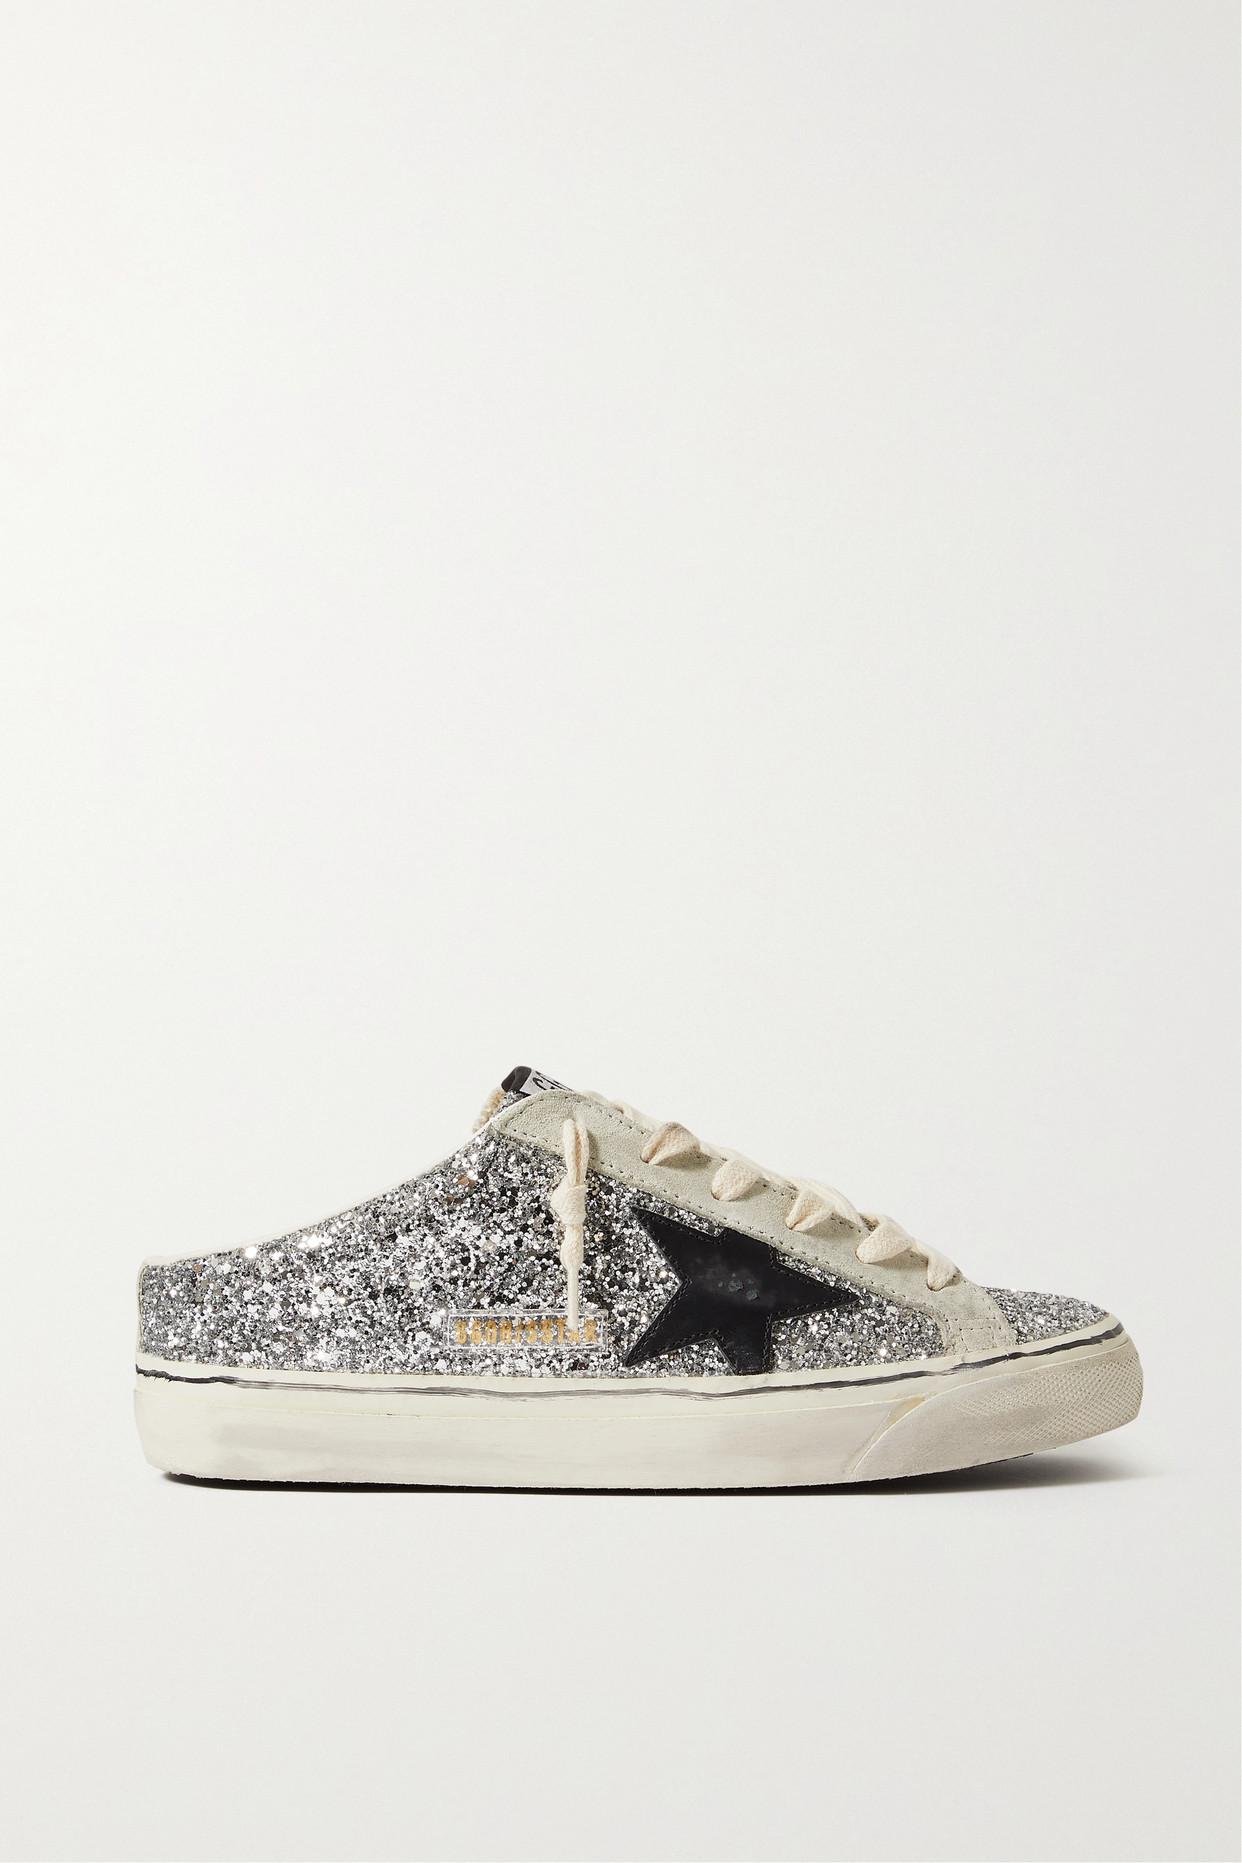 Golden Goose Super-star Sabot Distressed Glittered Leather And Suede  Slip-on Sneakers in Metallic | Lyst